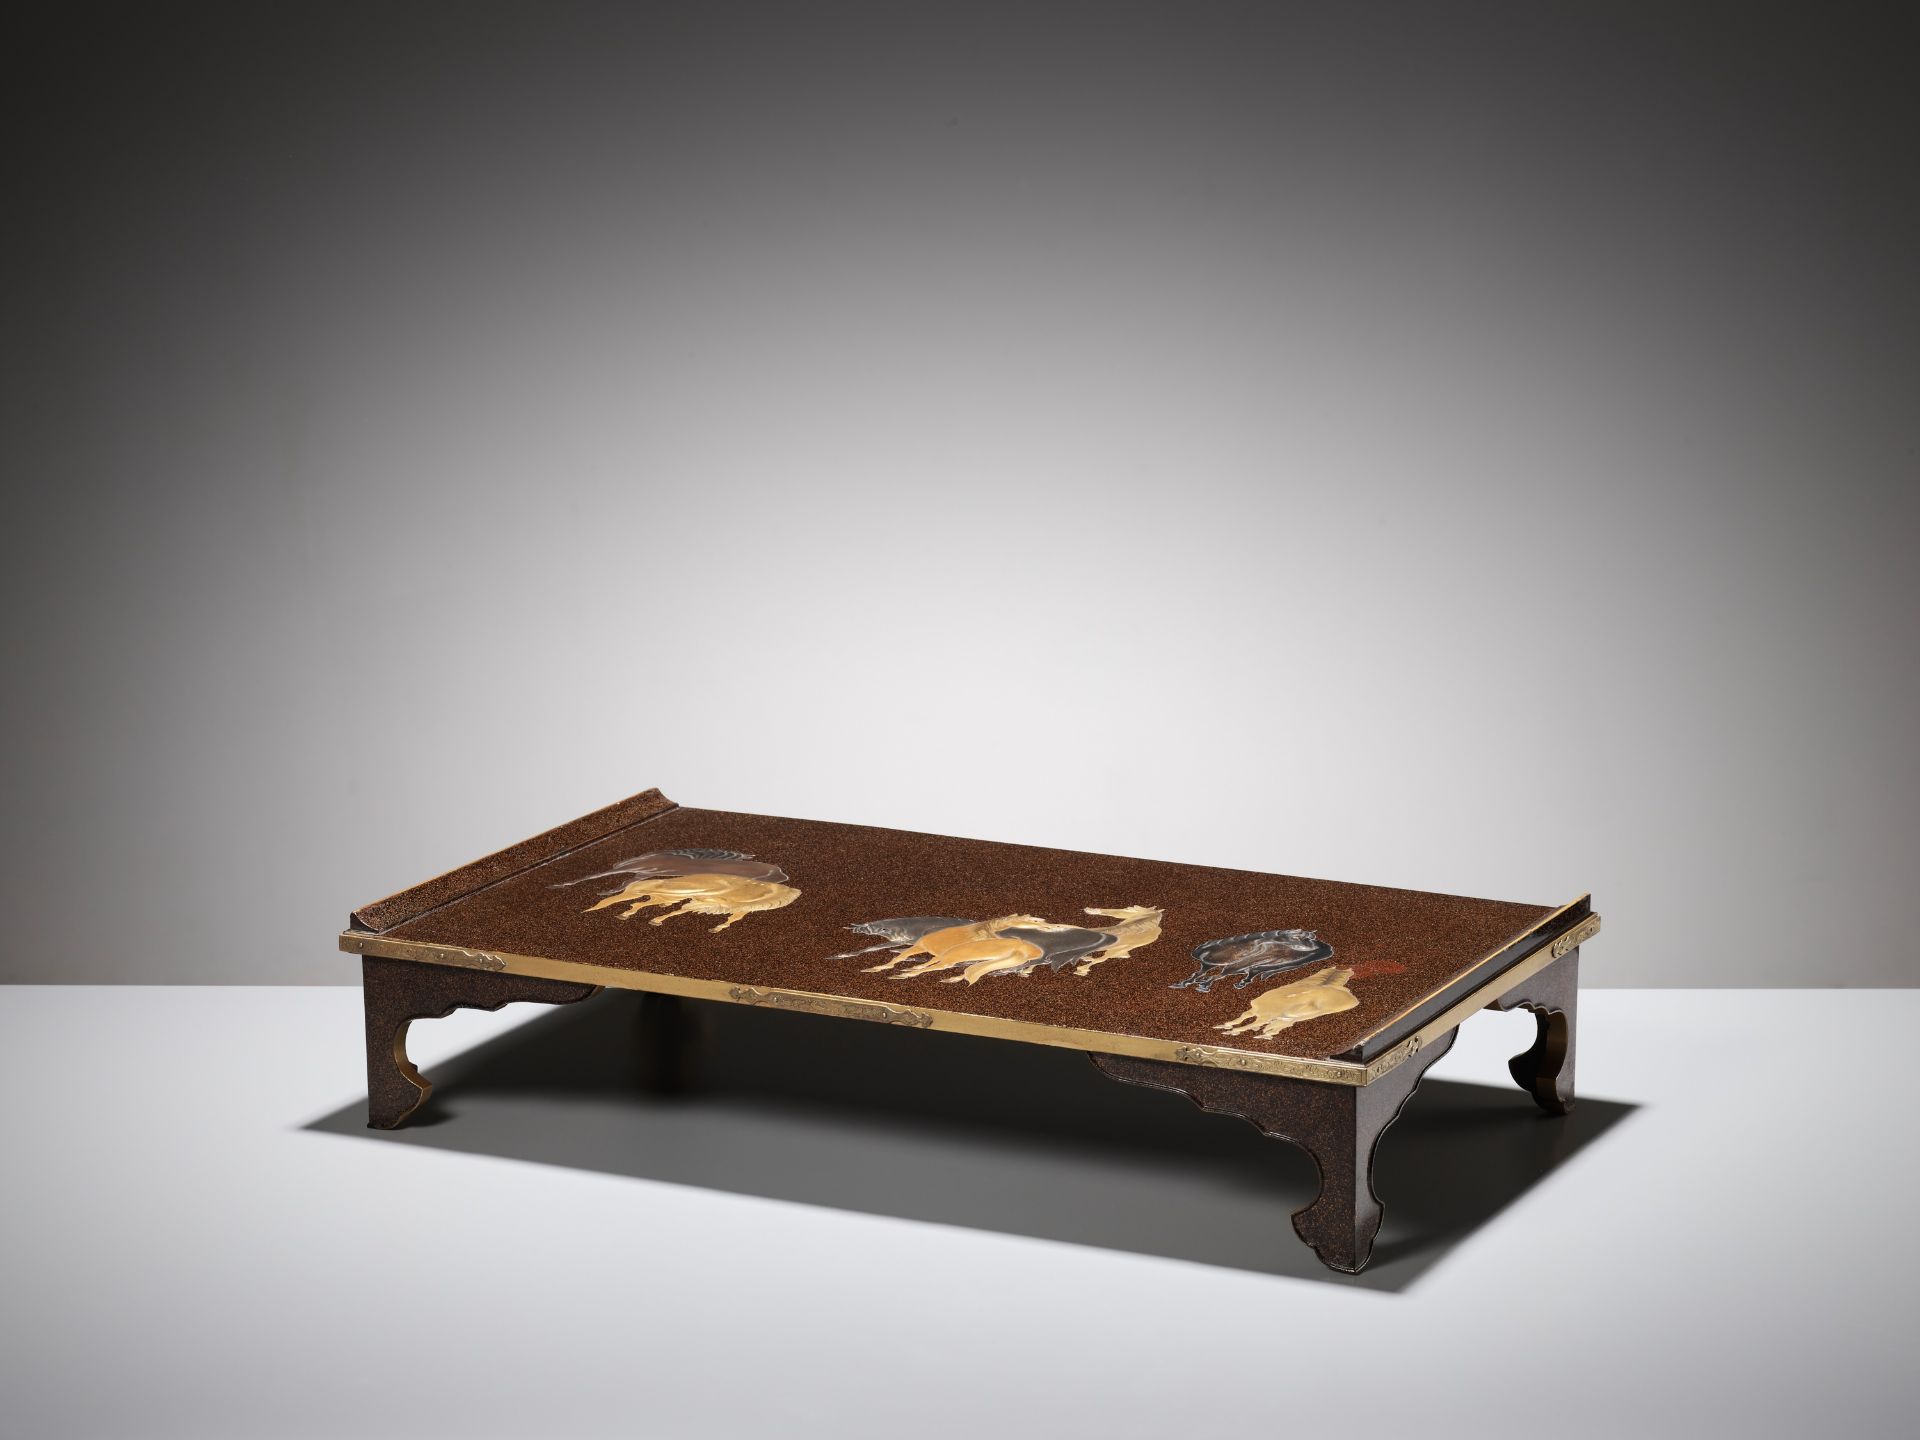 A RARE AND FINE LACQUER BUNDAI (WRITING TABLE) WITH SEVEN HORSES - Image 2 of 8